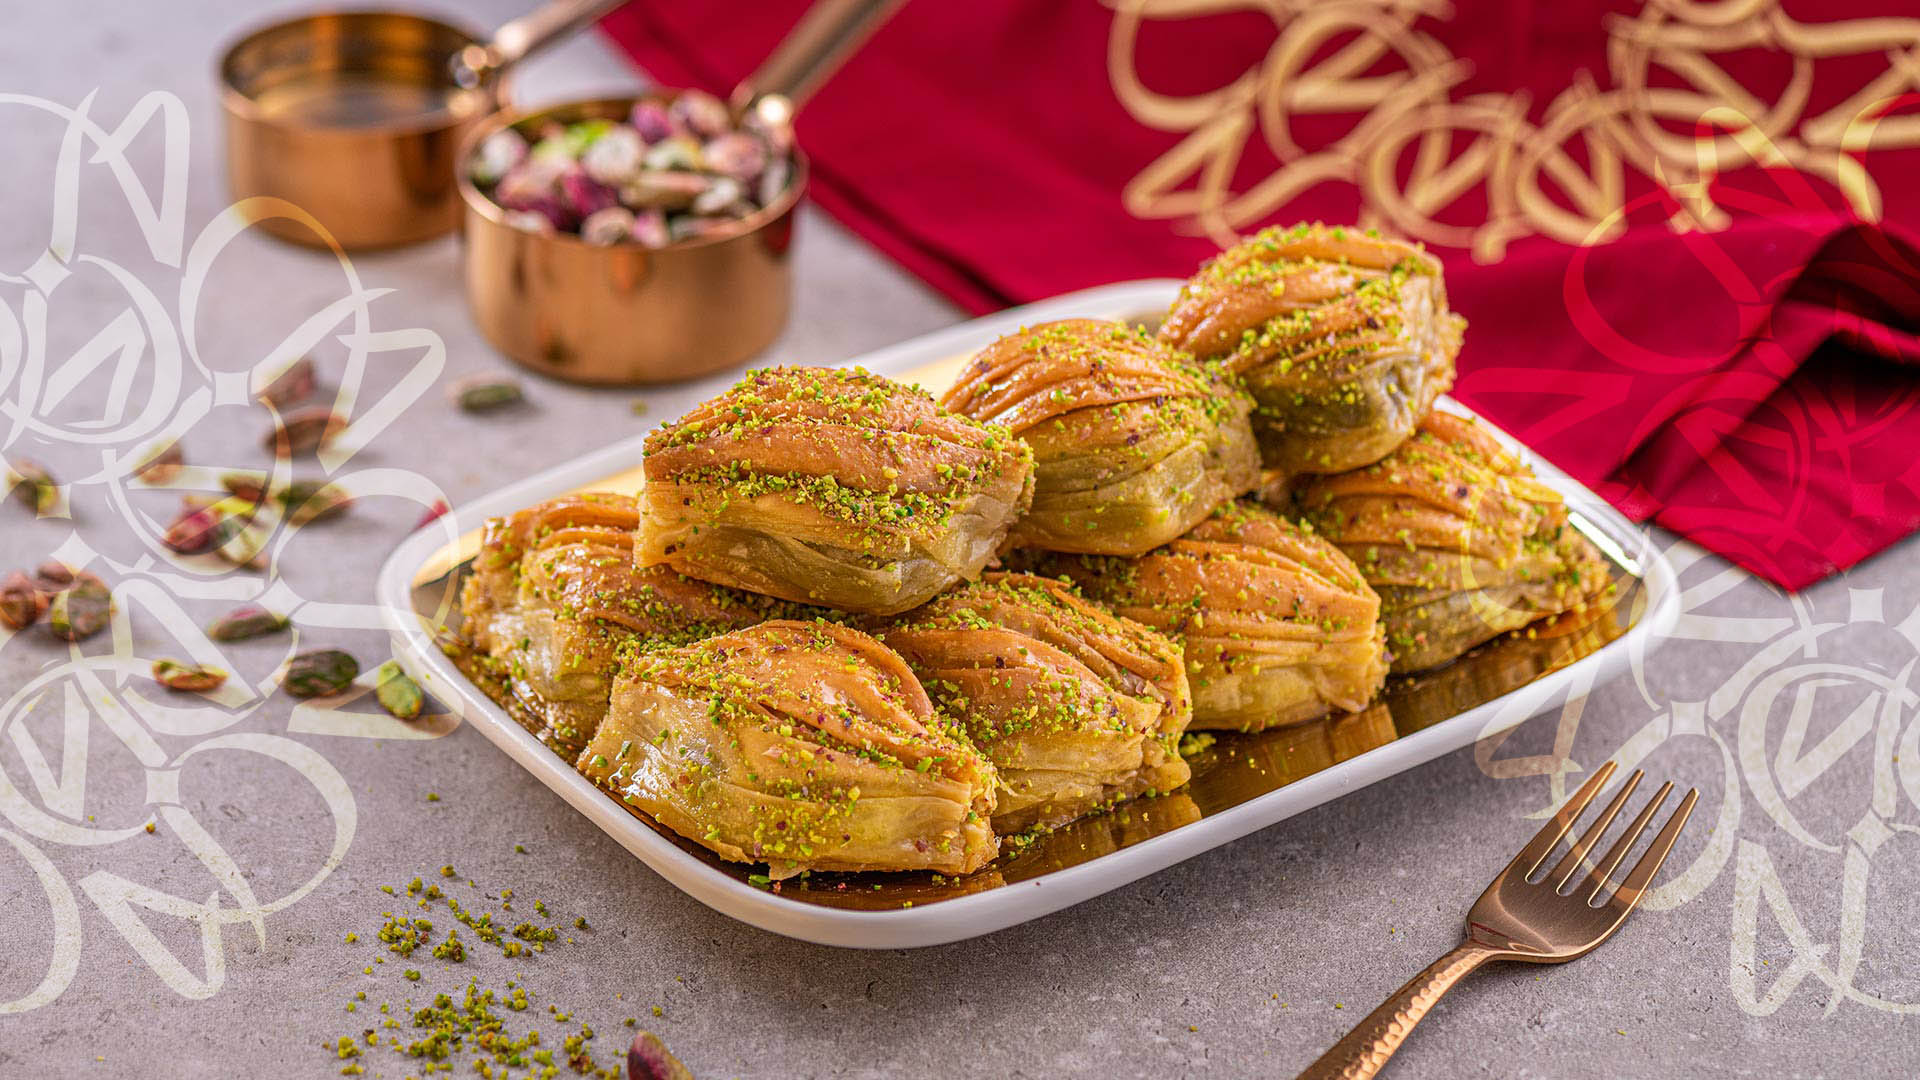 Step Into Sweetness: Your Invitation to Visit Our Arabic Sweets Shop in Dubai